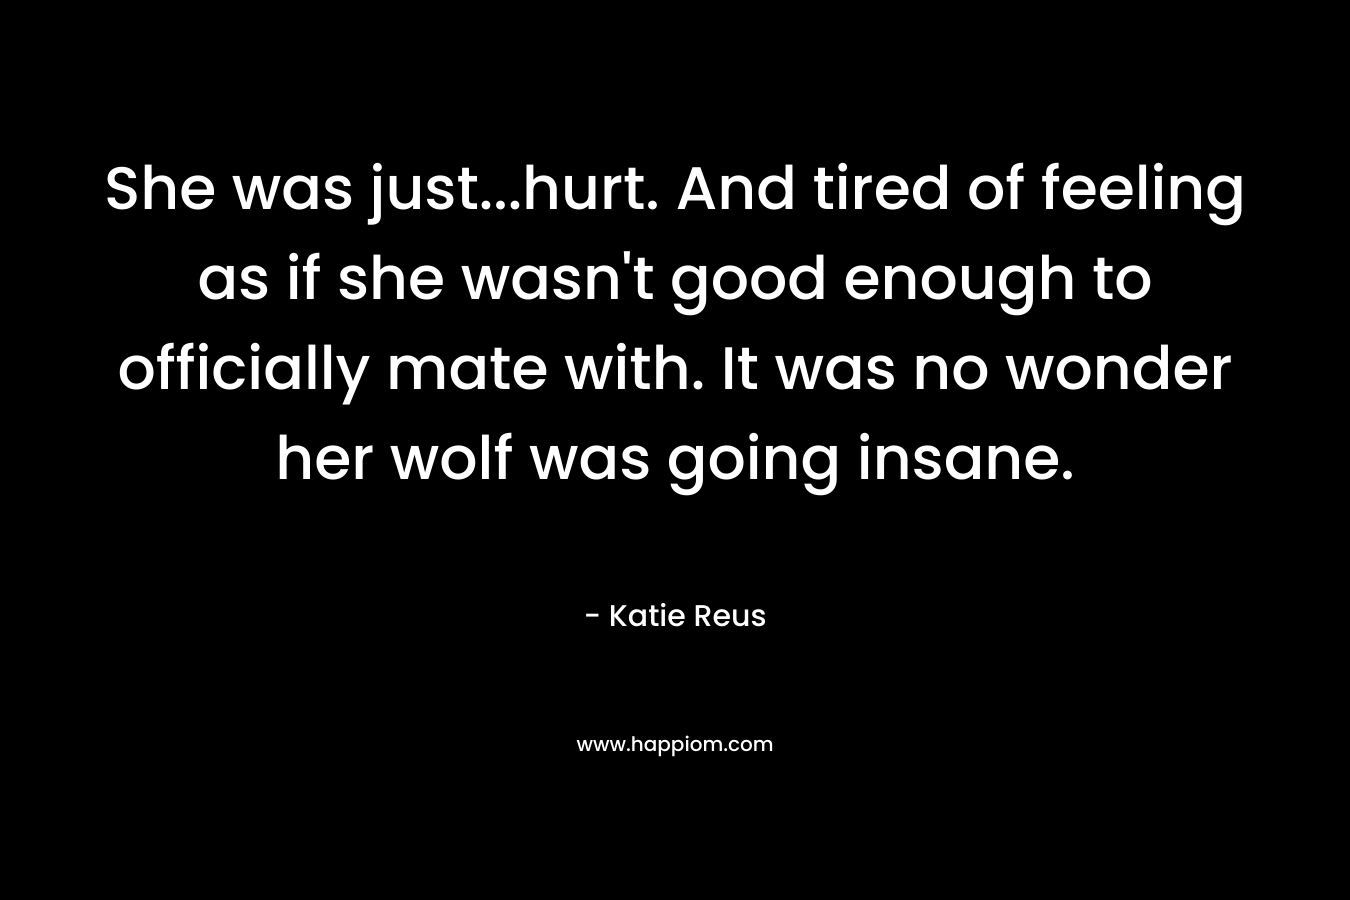 She was just...hurt. And tired of feeling as if she wasn't good enough to officially mate with. It was no wonder her wolf was going insane.